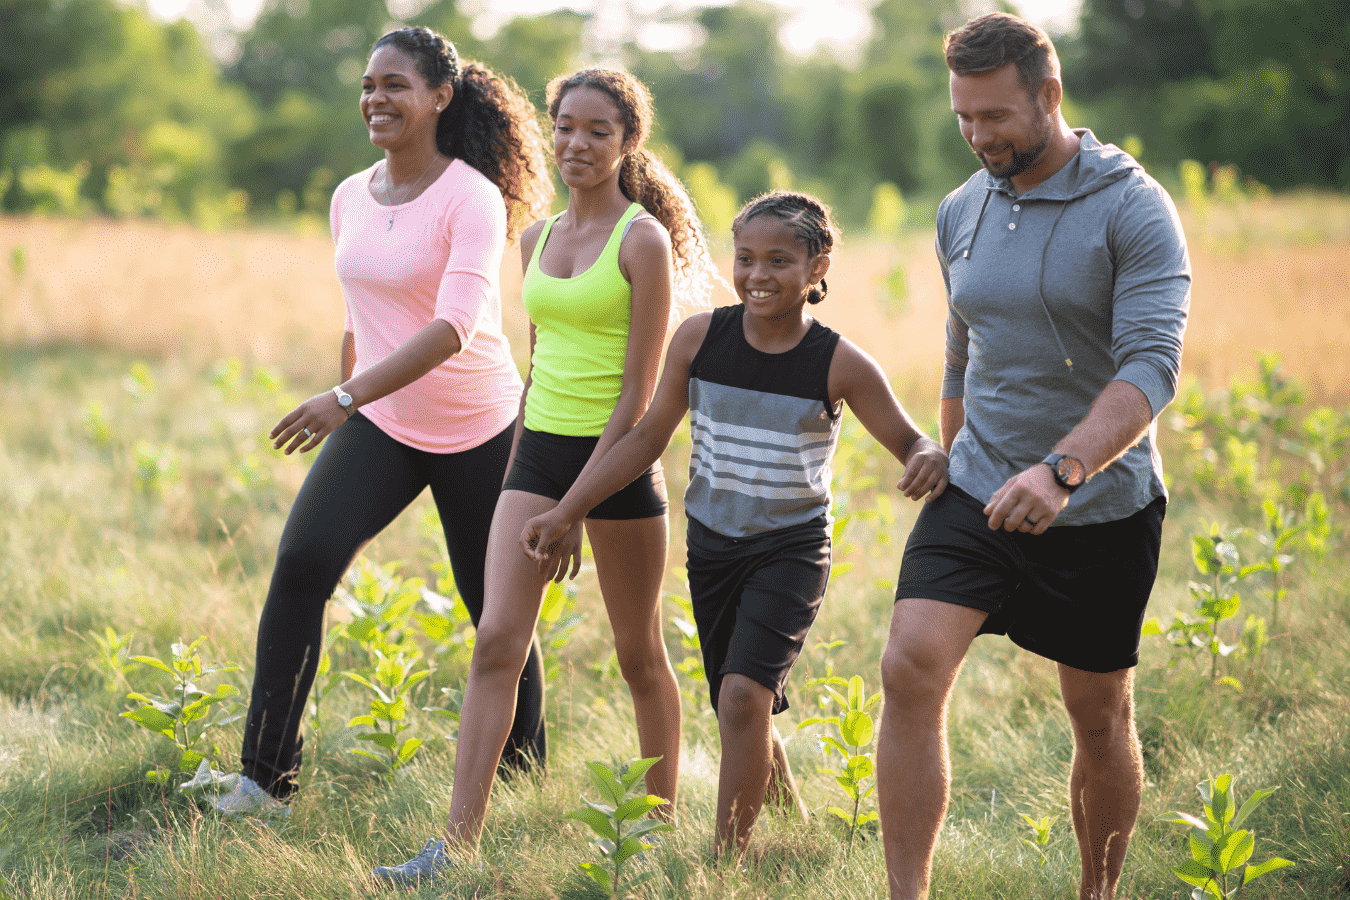 A mixed-racial couple and their two children, a young boy and an older girl, walk through a field while doing a family exercise